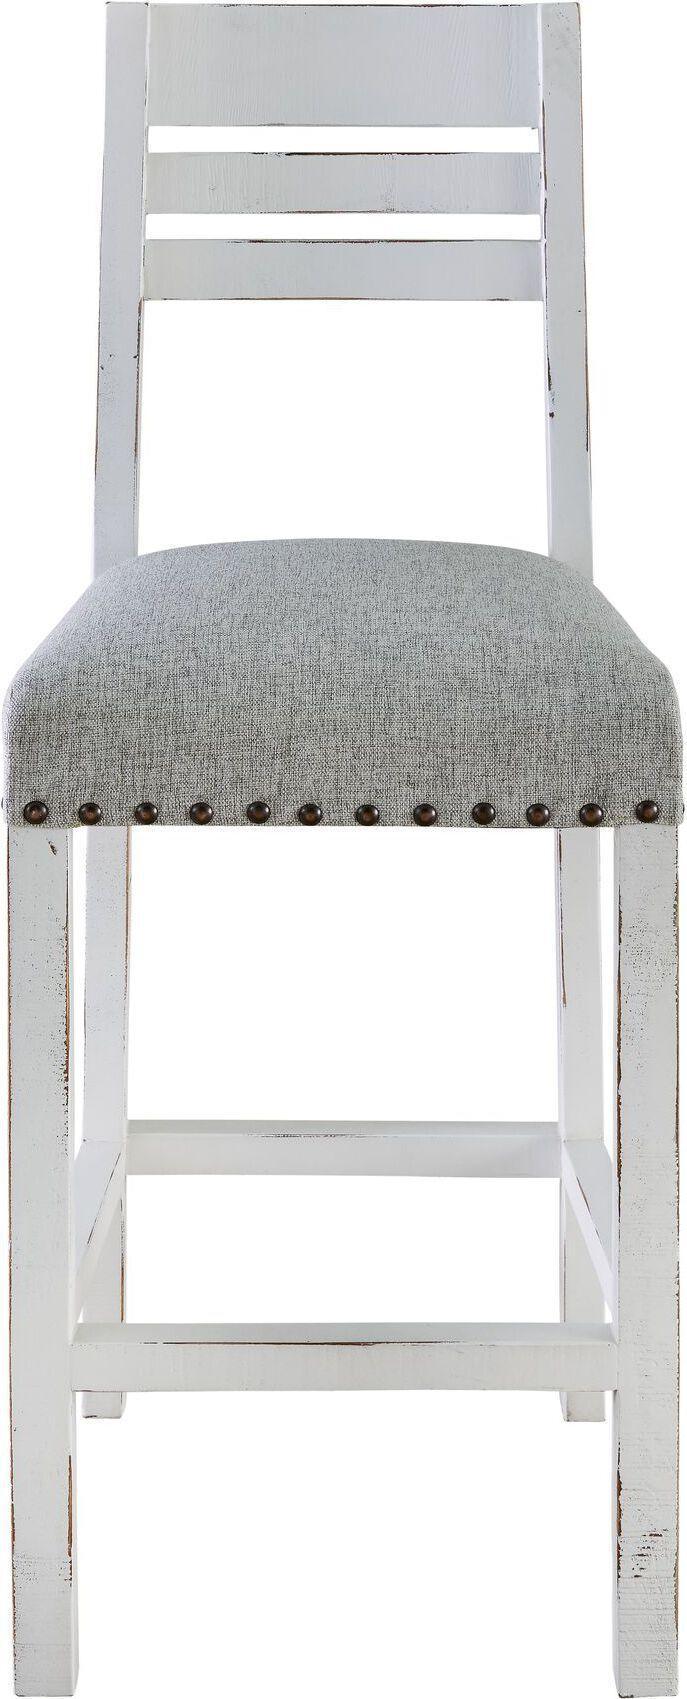 Elements Barstools - Robertson Bar Stool in White